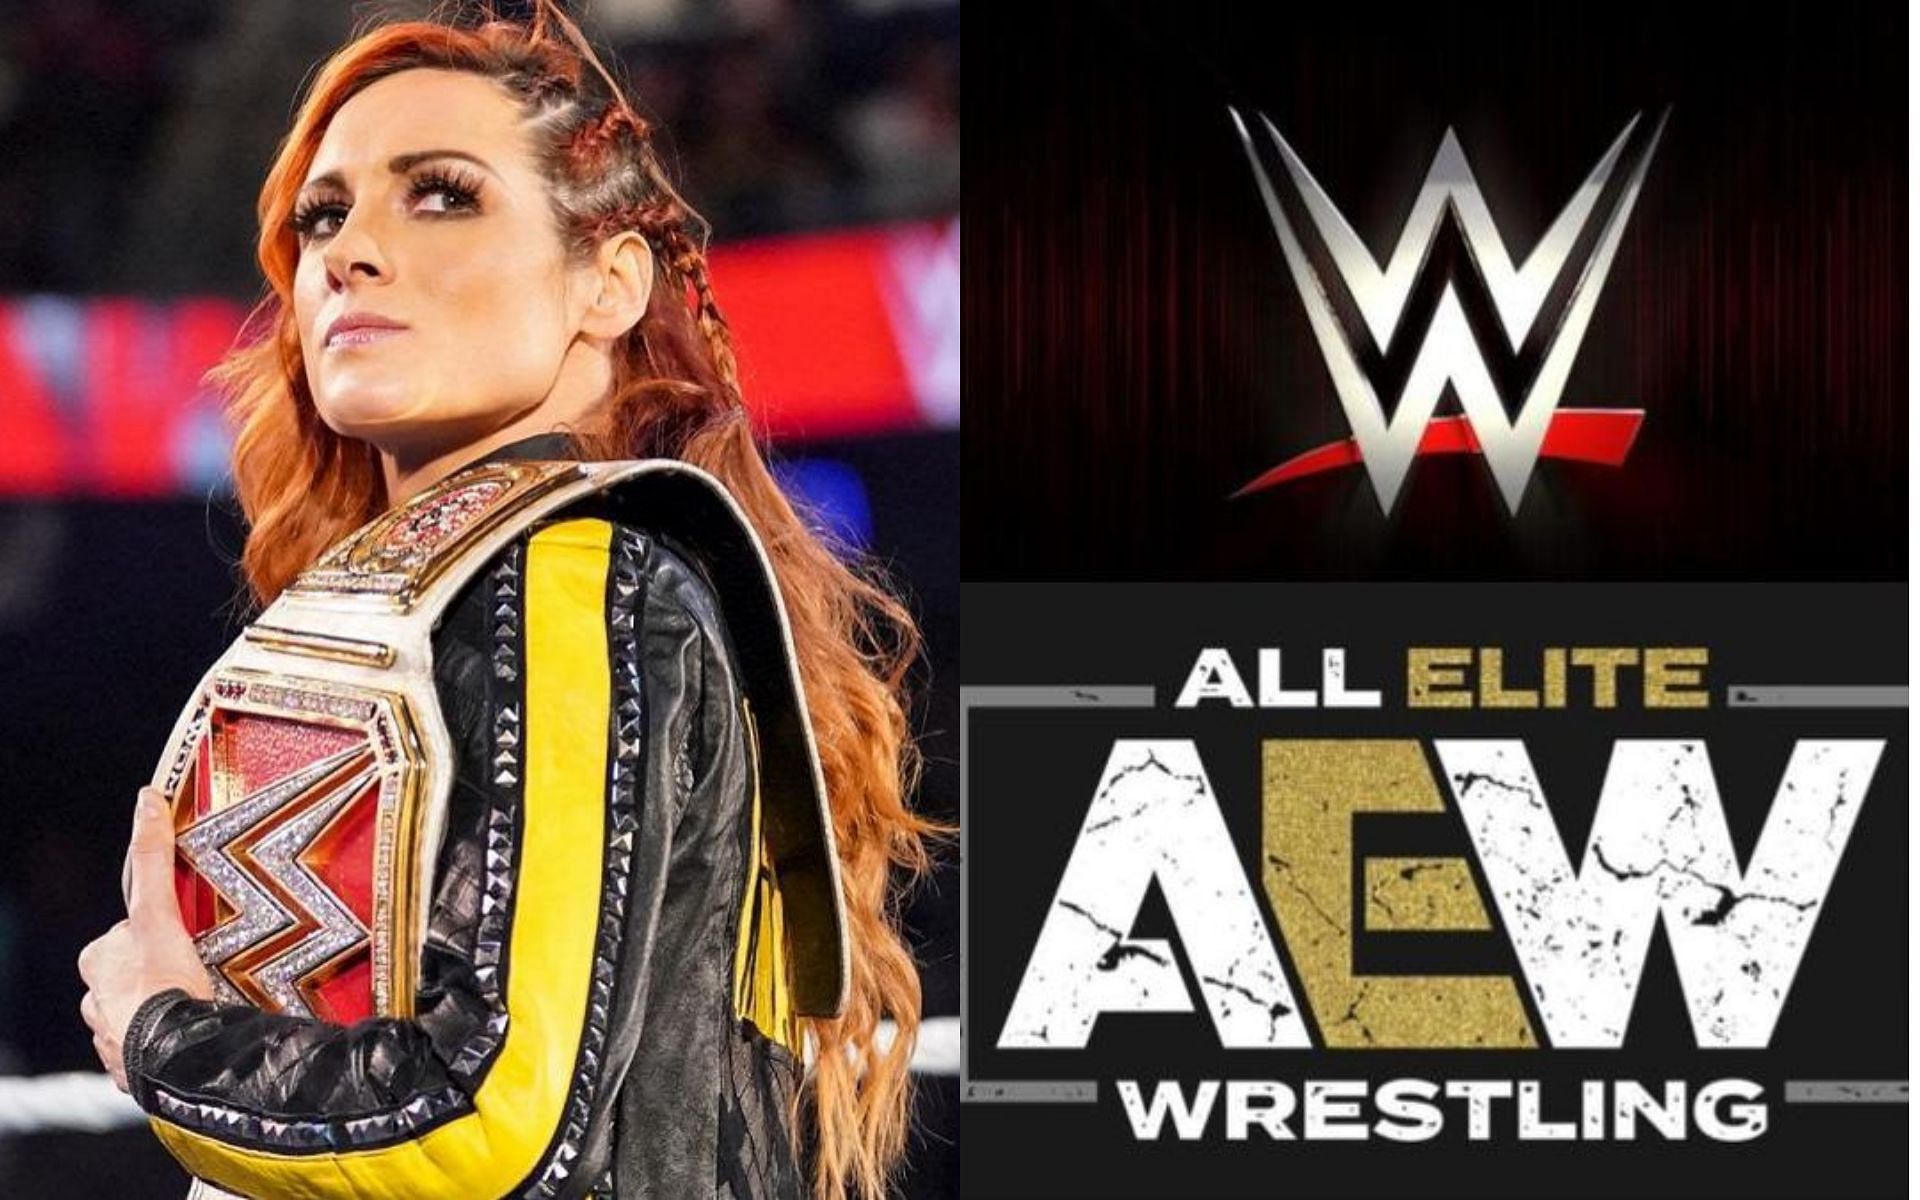 Becky Lynch (left) and AEW and WWE logos (right).